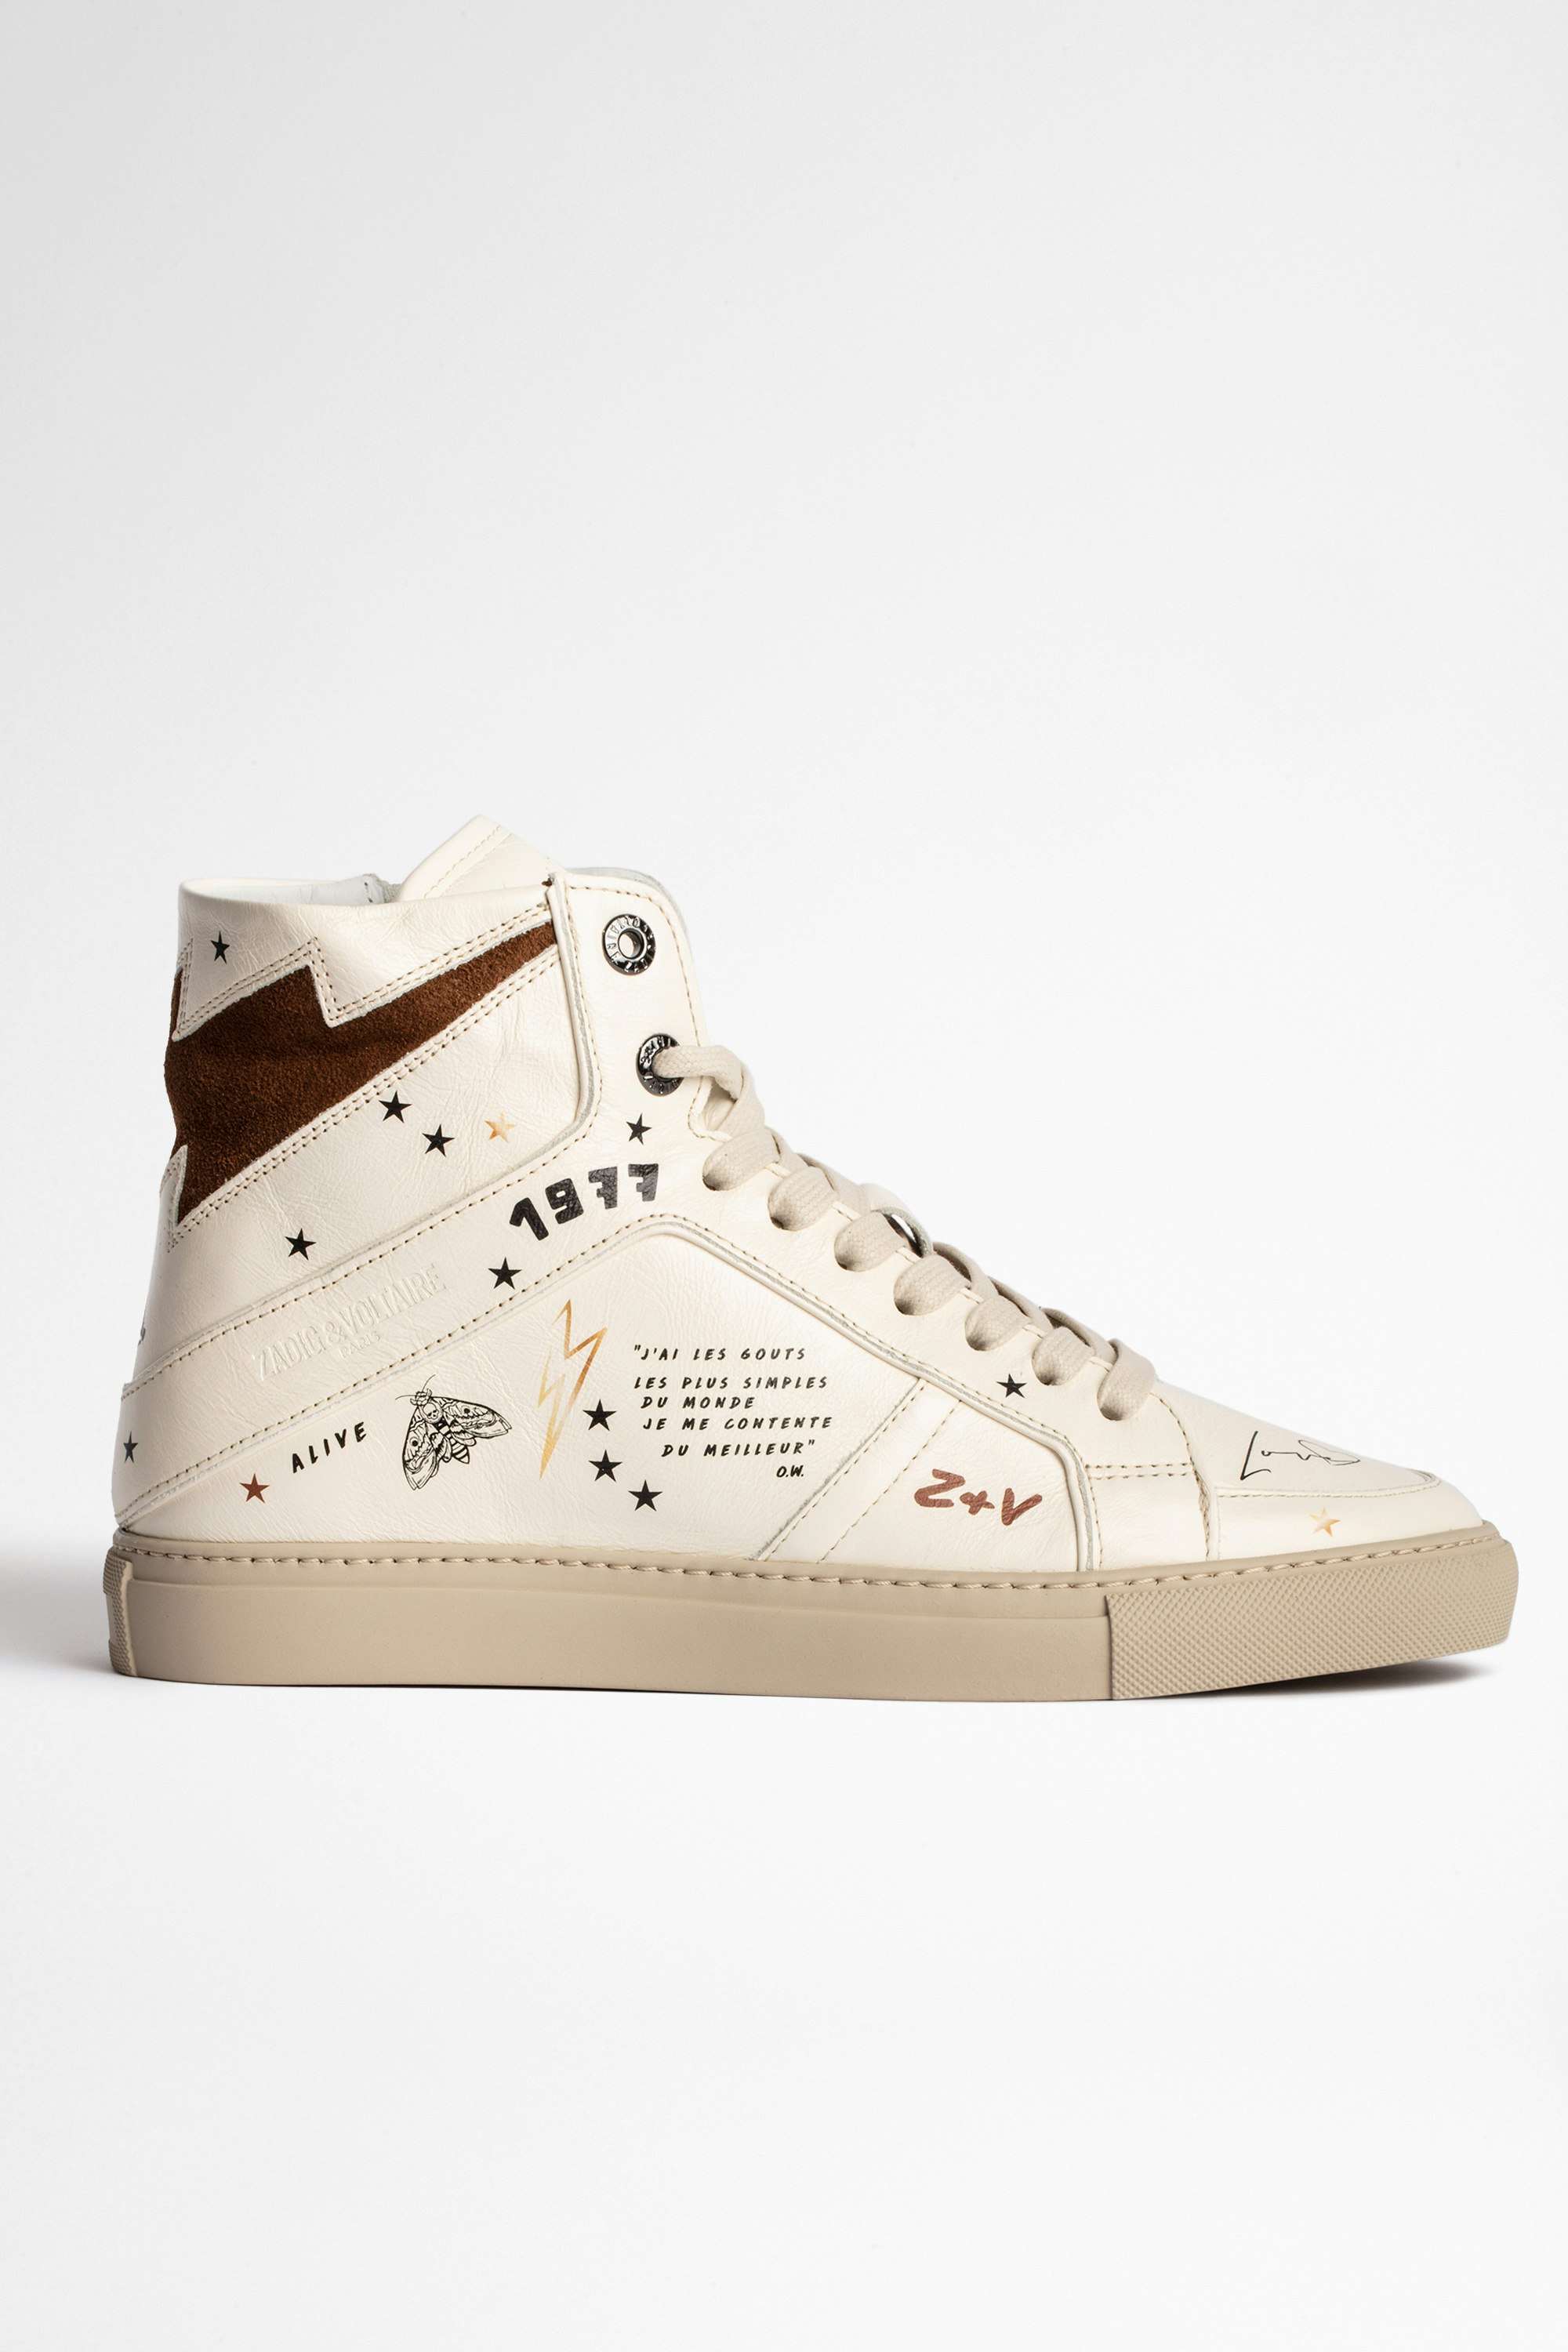 ZV1747 High Flash Crush Sneakers Leather Women’s high-top sneakers in smooth white leather with screen-printed symbols